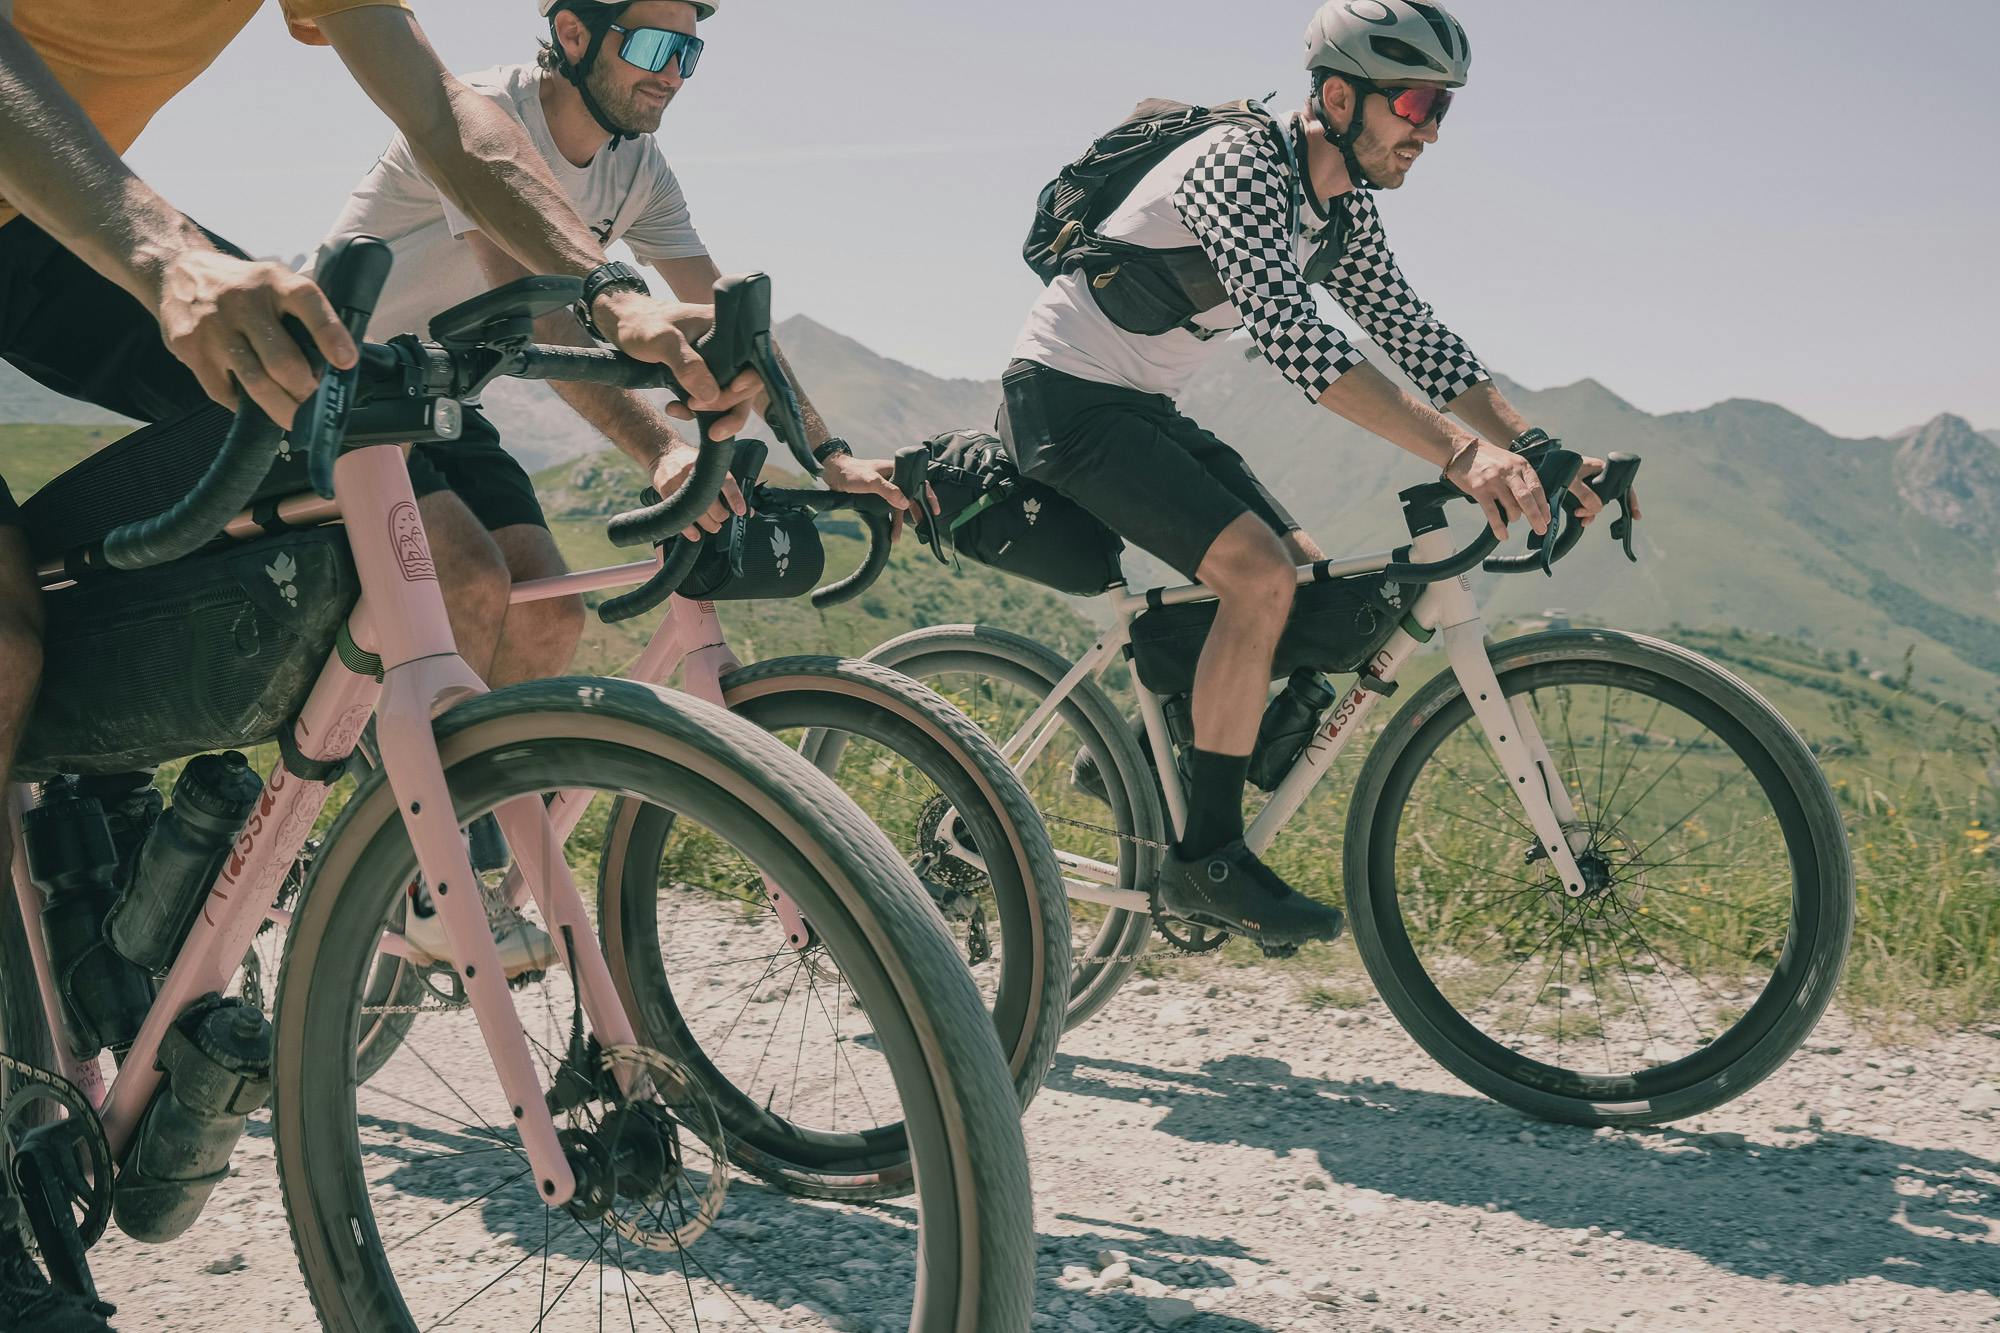 A group of gravel riders head to head on a dirt road.